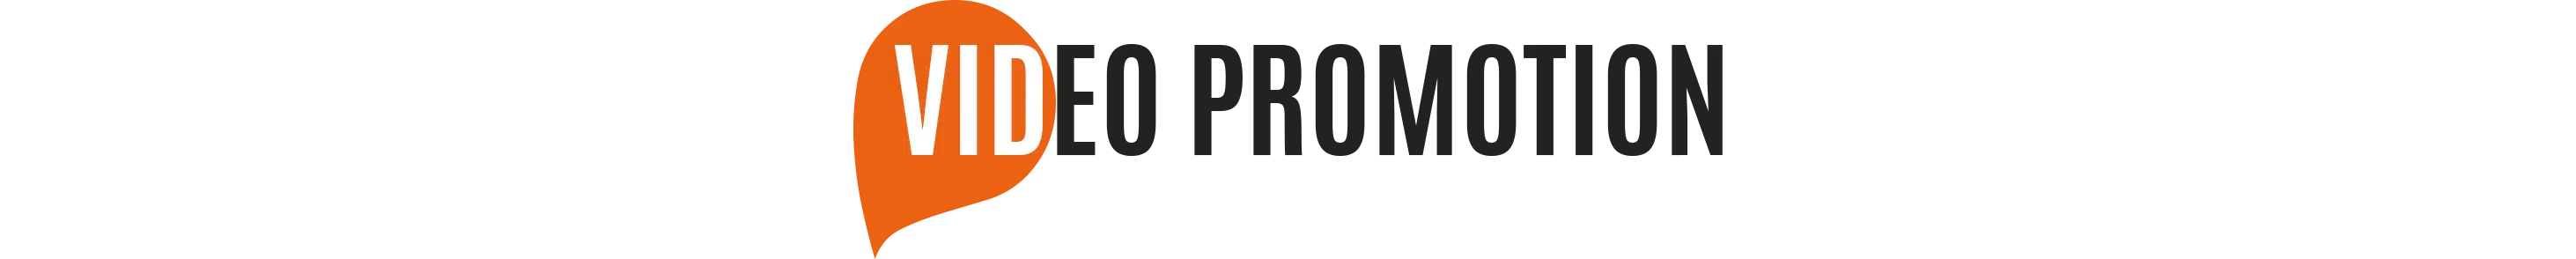 Video Promotion Packages